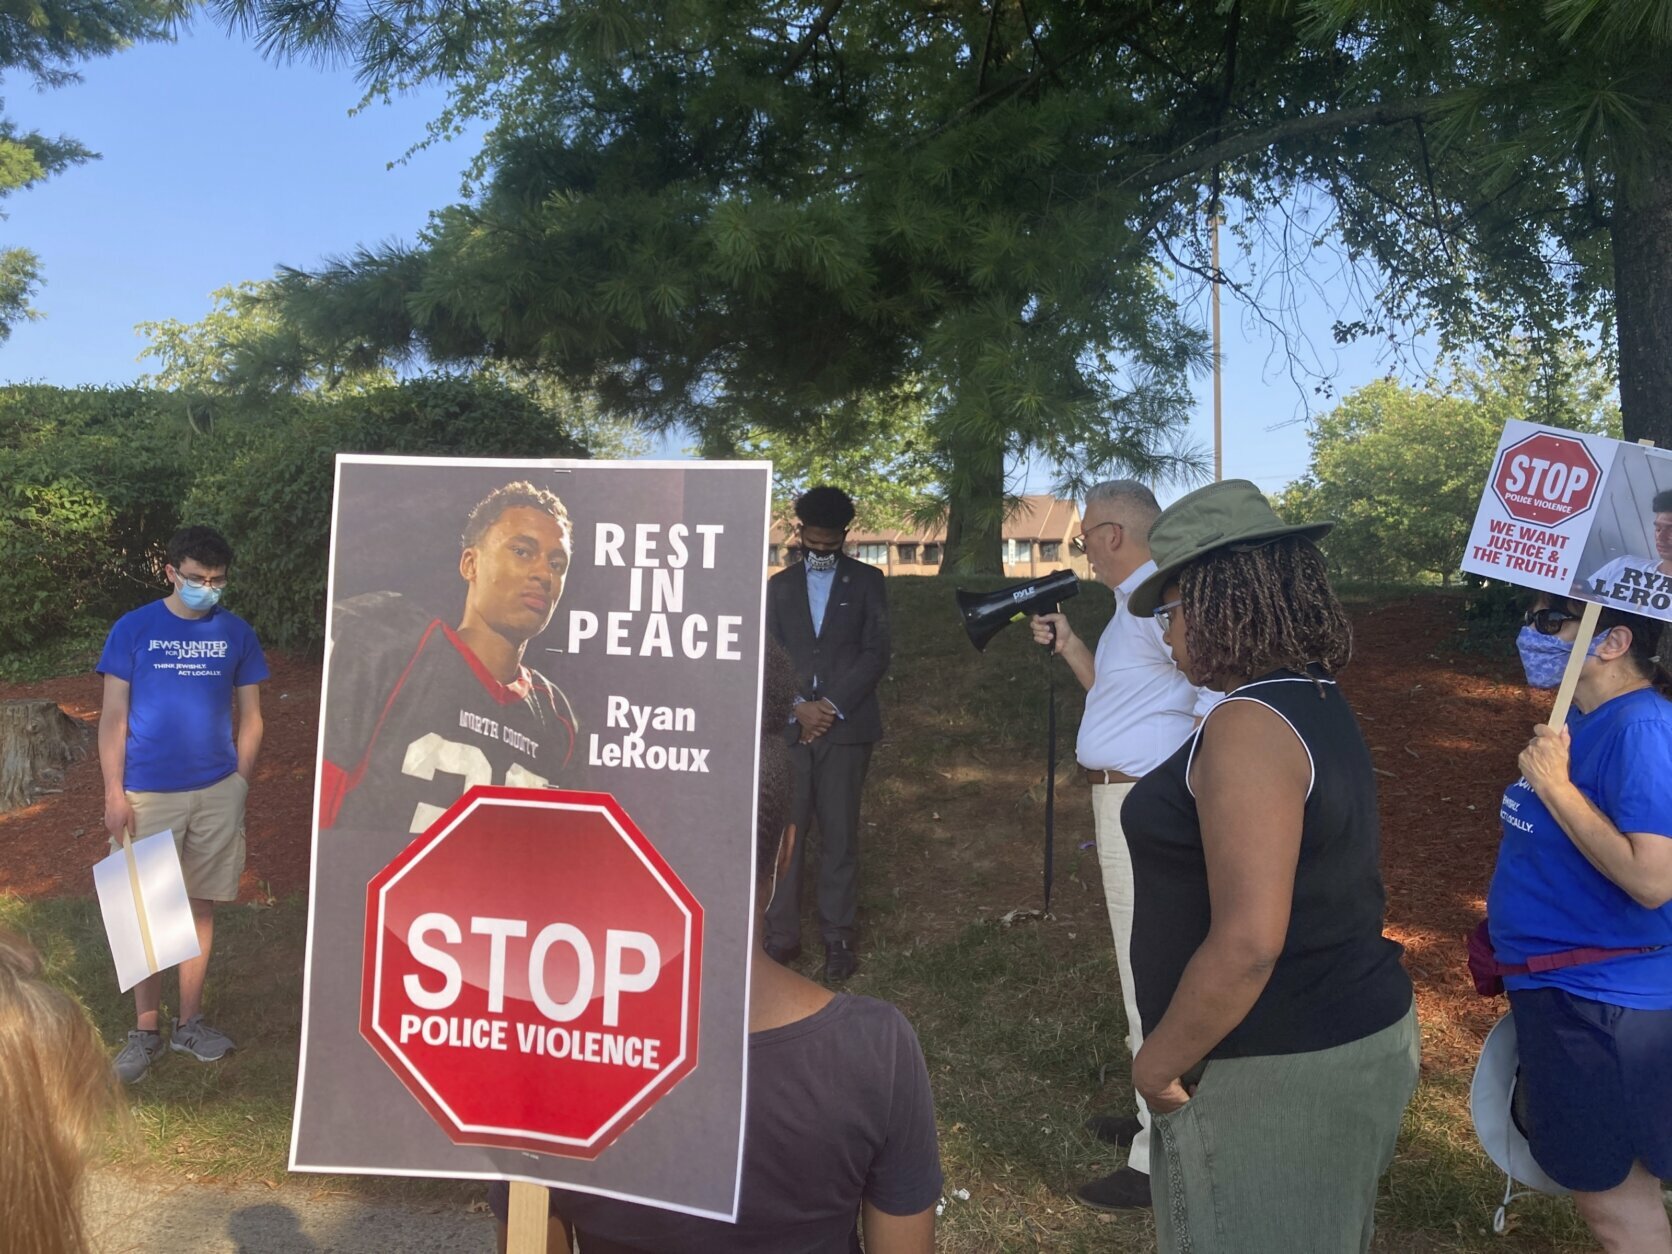 Activists gather for a vigil on Tuesday, July 27, 2021 near the McDonald’s restaurant in Gaithersburg, Md. where Ryan LeRoux, a 21-year-old Black man, was shot and killed by police on July 16. (AP Photo/Michael Kunzelman)